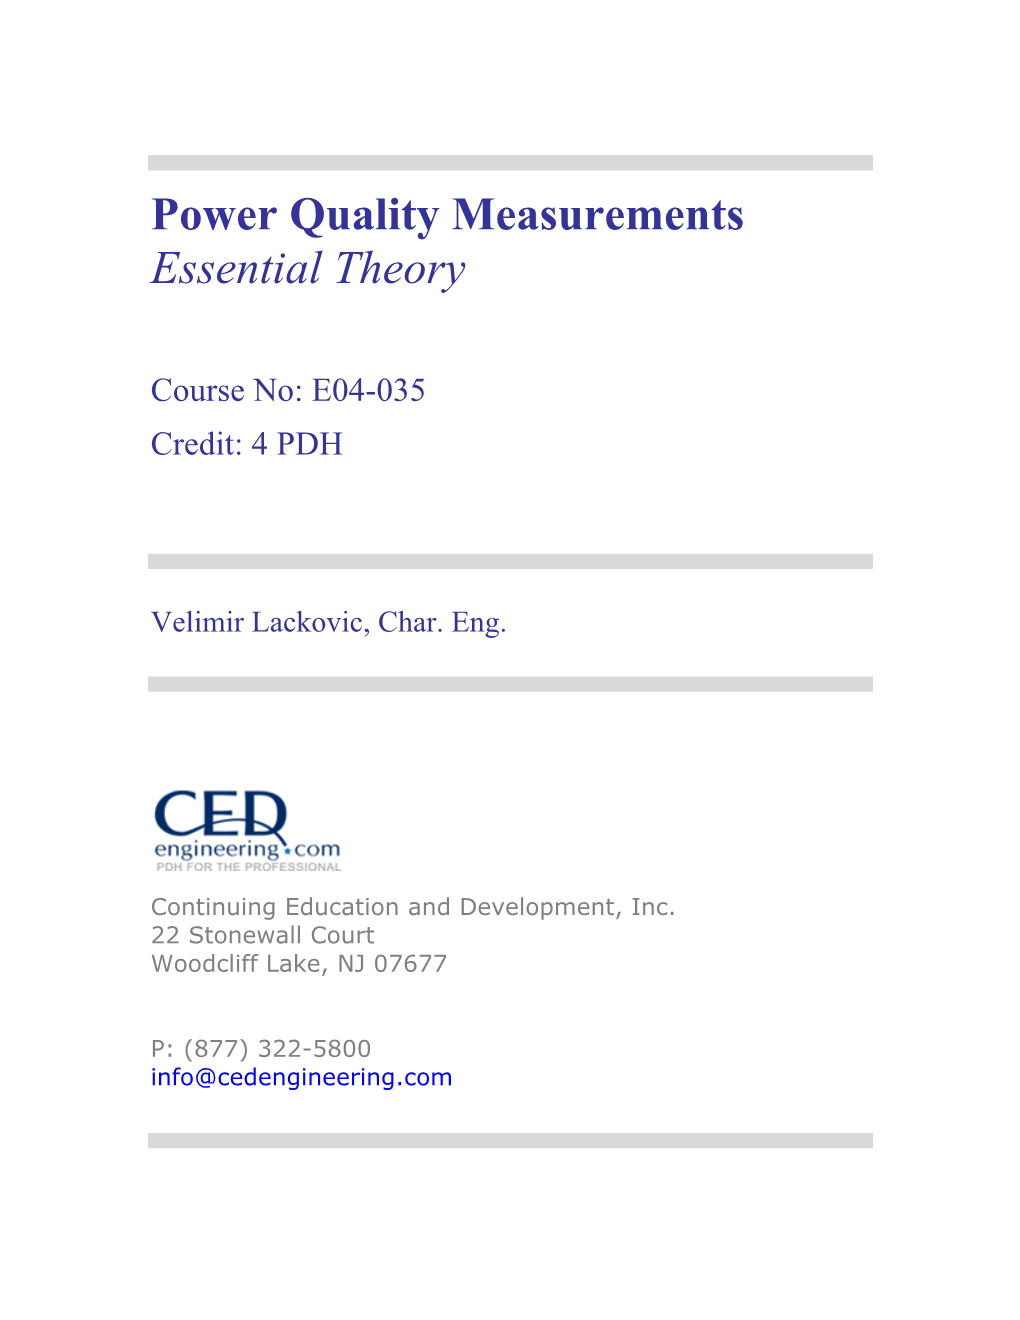 Power Quality Measurements Essential Theory